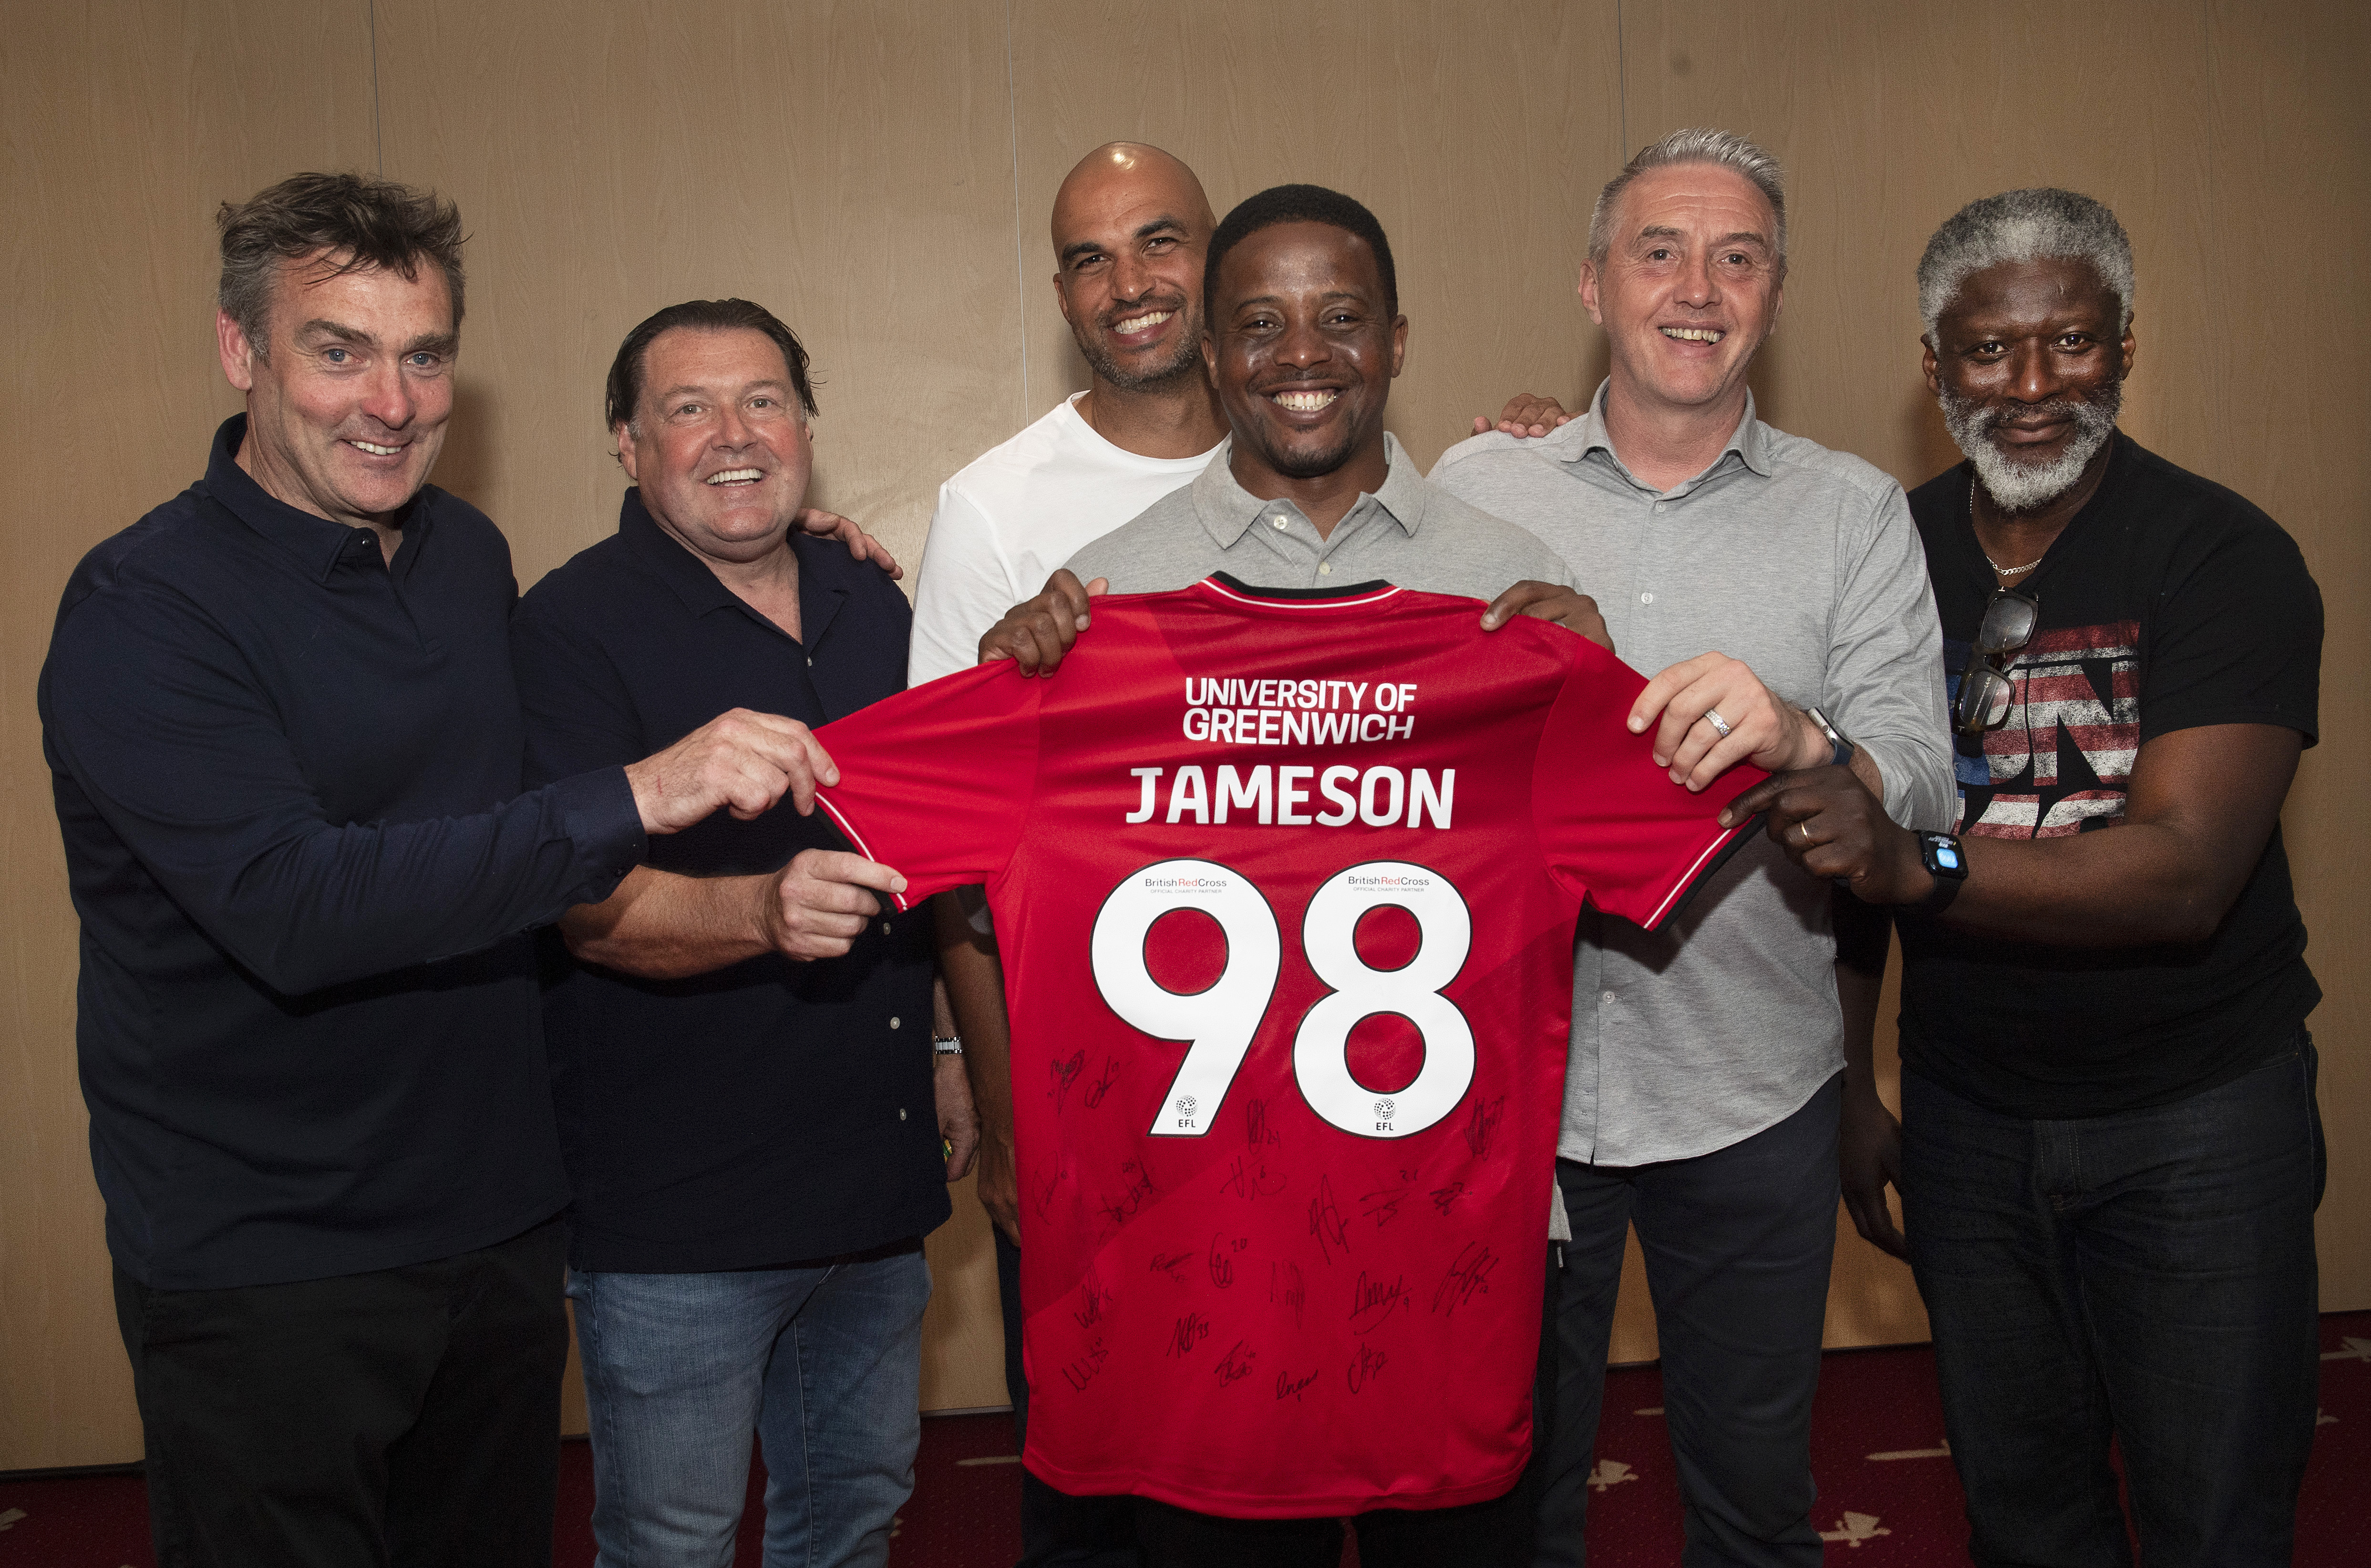 (Left to right) Steve Brown, Peter Garland, Jonathan Fortune, Kevin Lisbie, Dean Kiely and Paul Mortimer hold a signed Charlton Athletic shirt before a Charlton Legends Q&A in the Meantime Fans’ Bar at The Valley, London